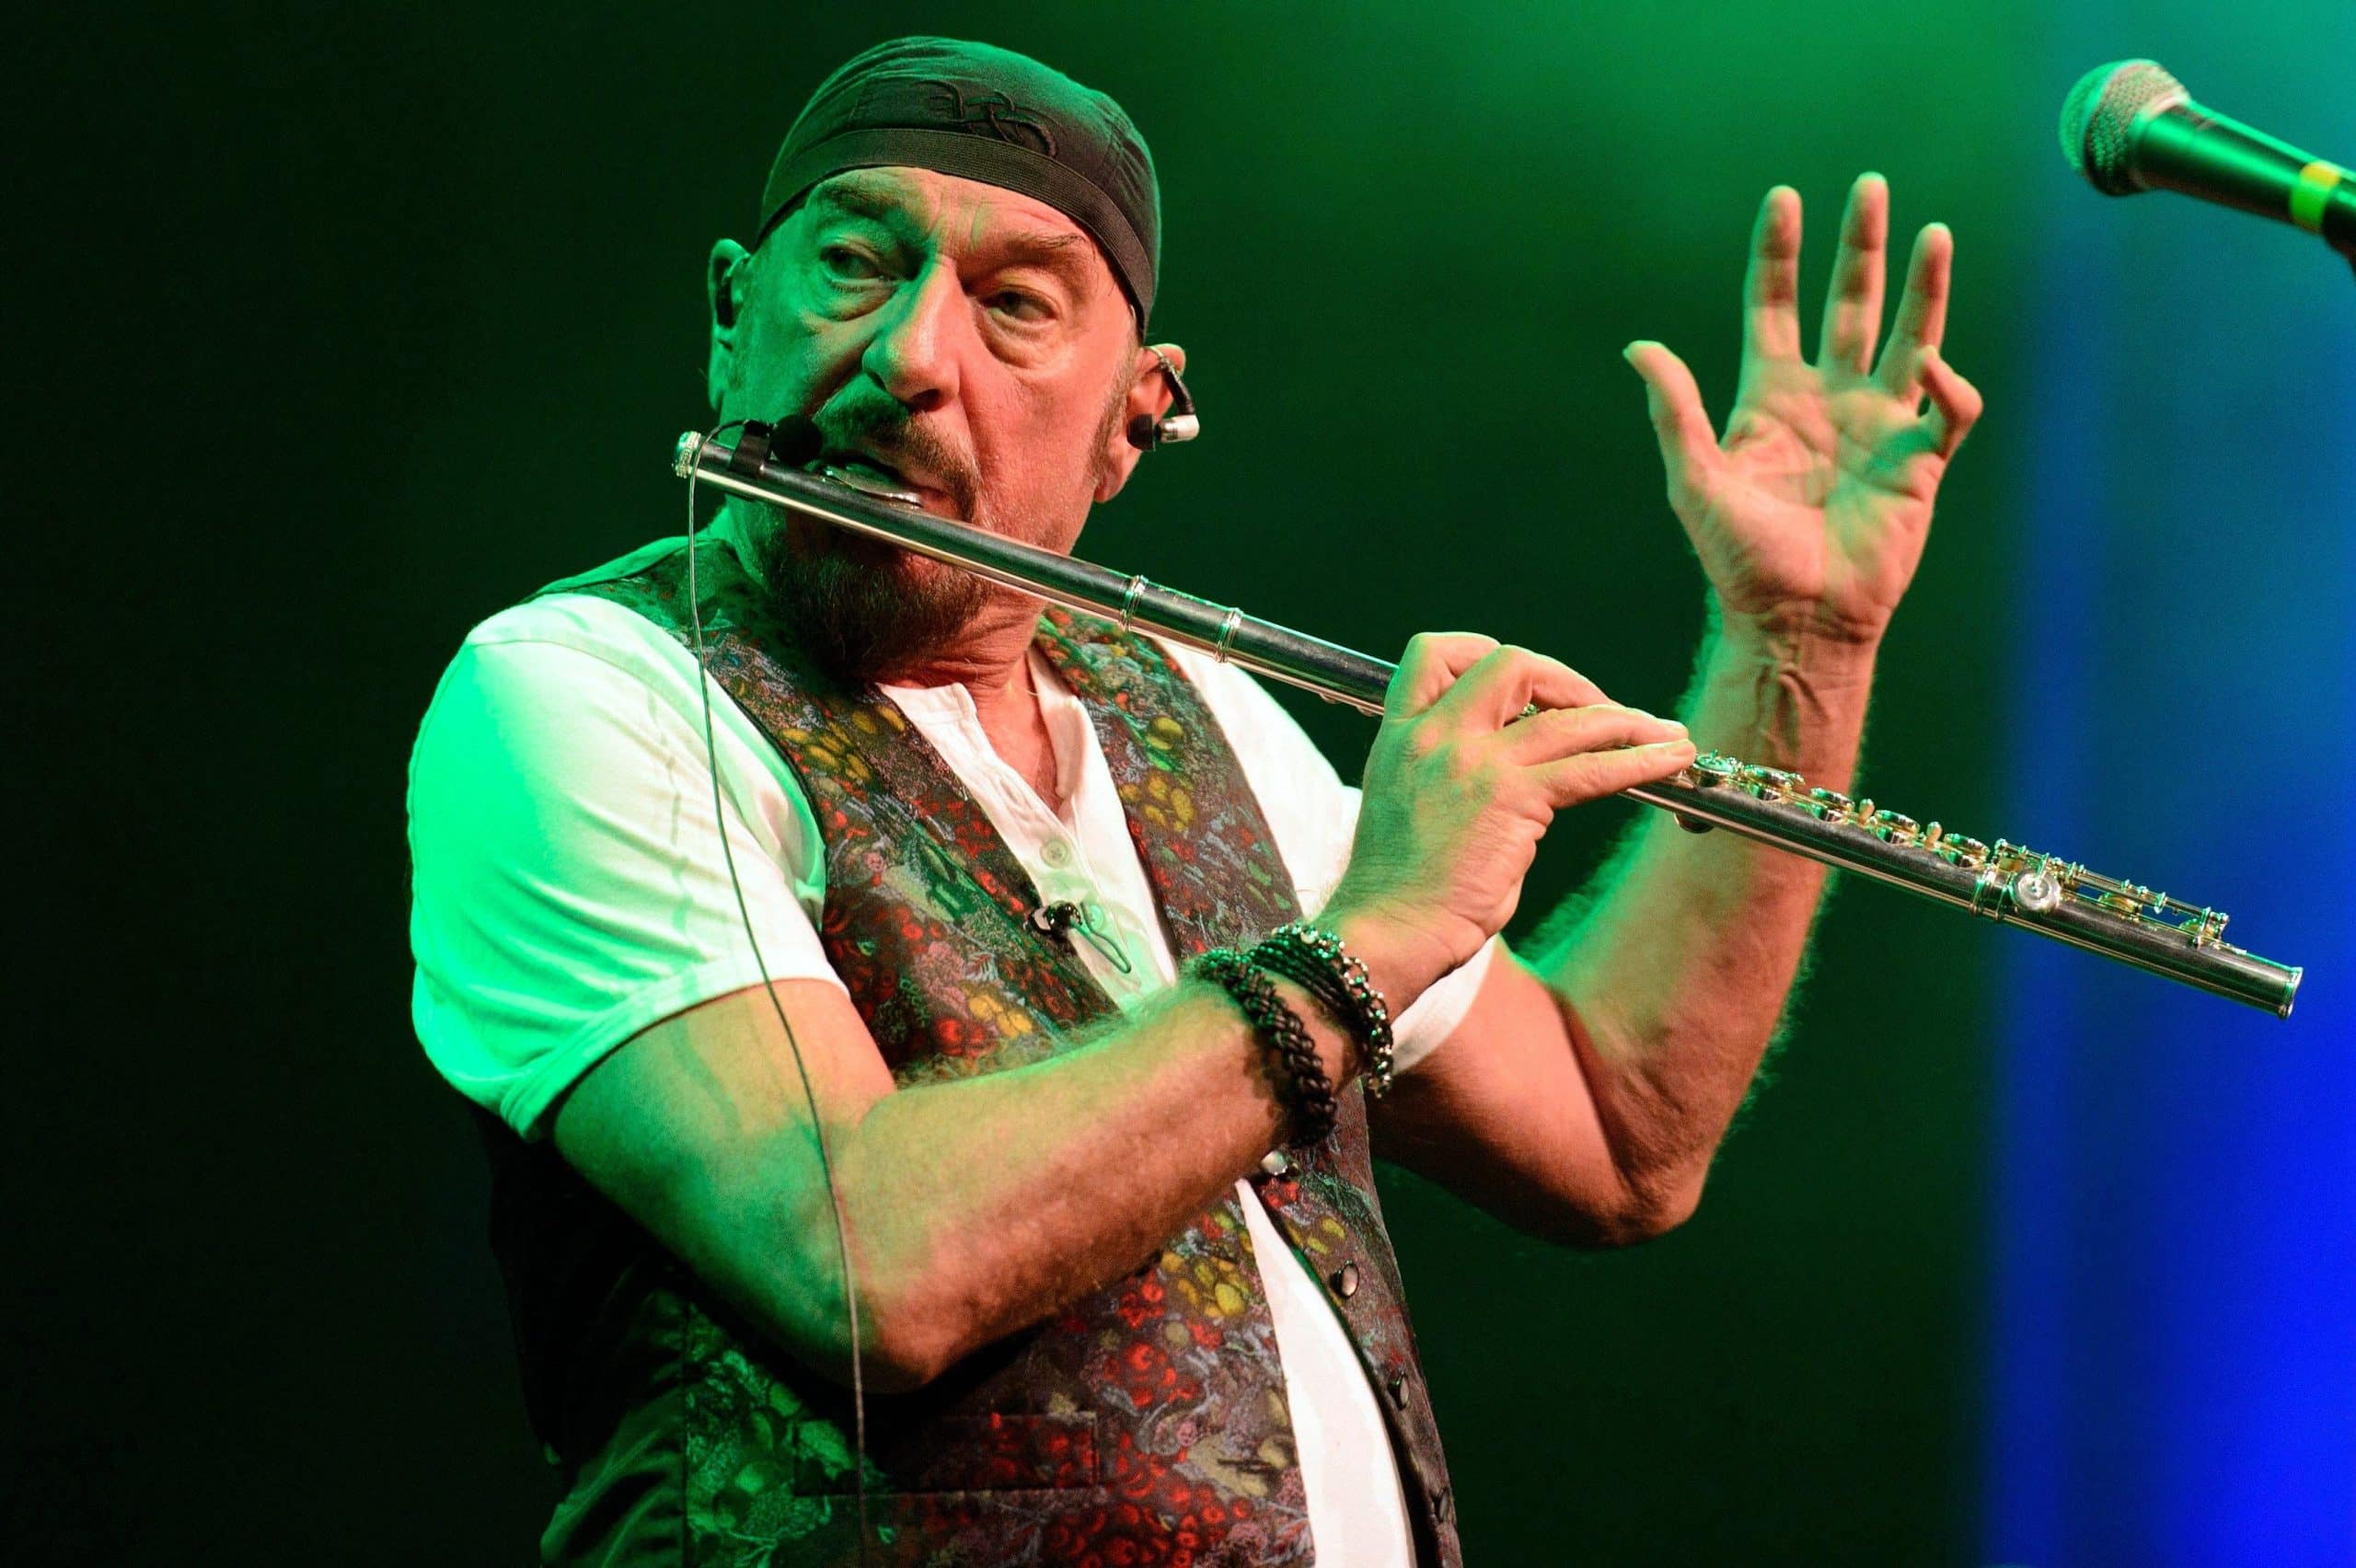 Jethro Tull tour 2023: Where to buy tickets, best prices, dates